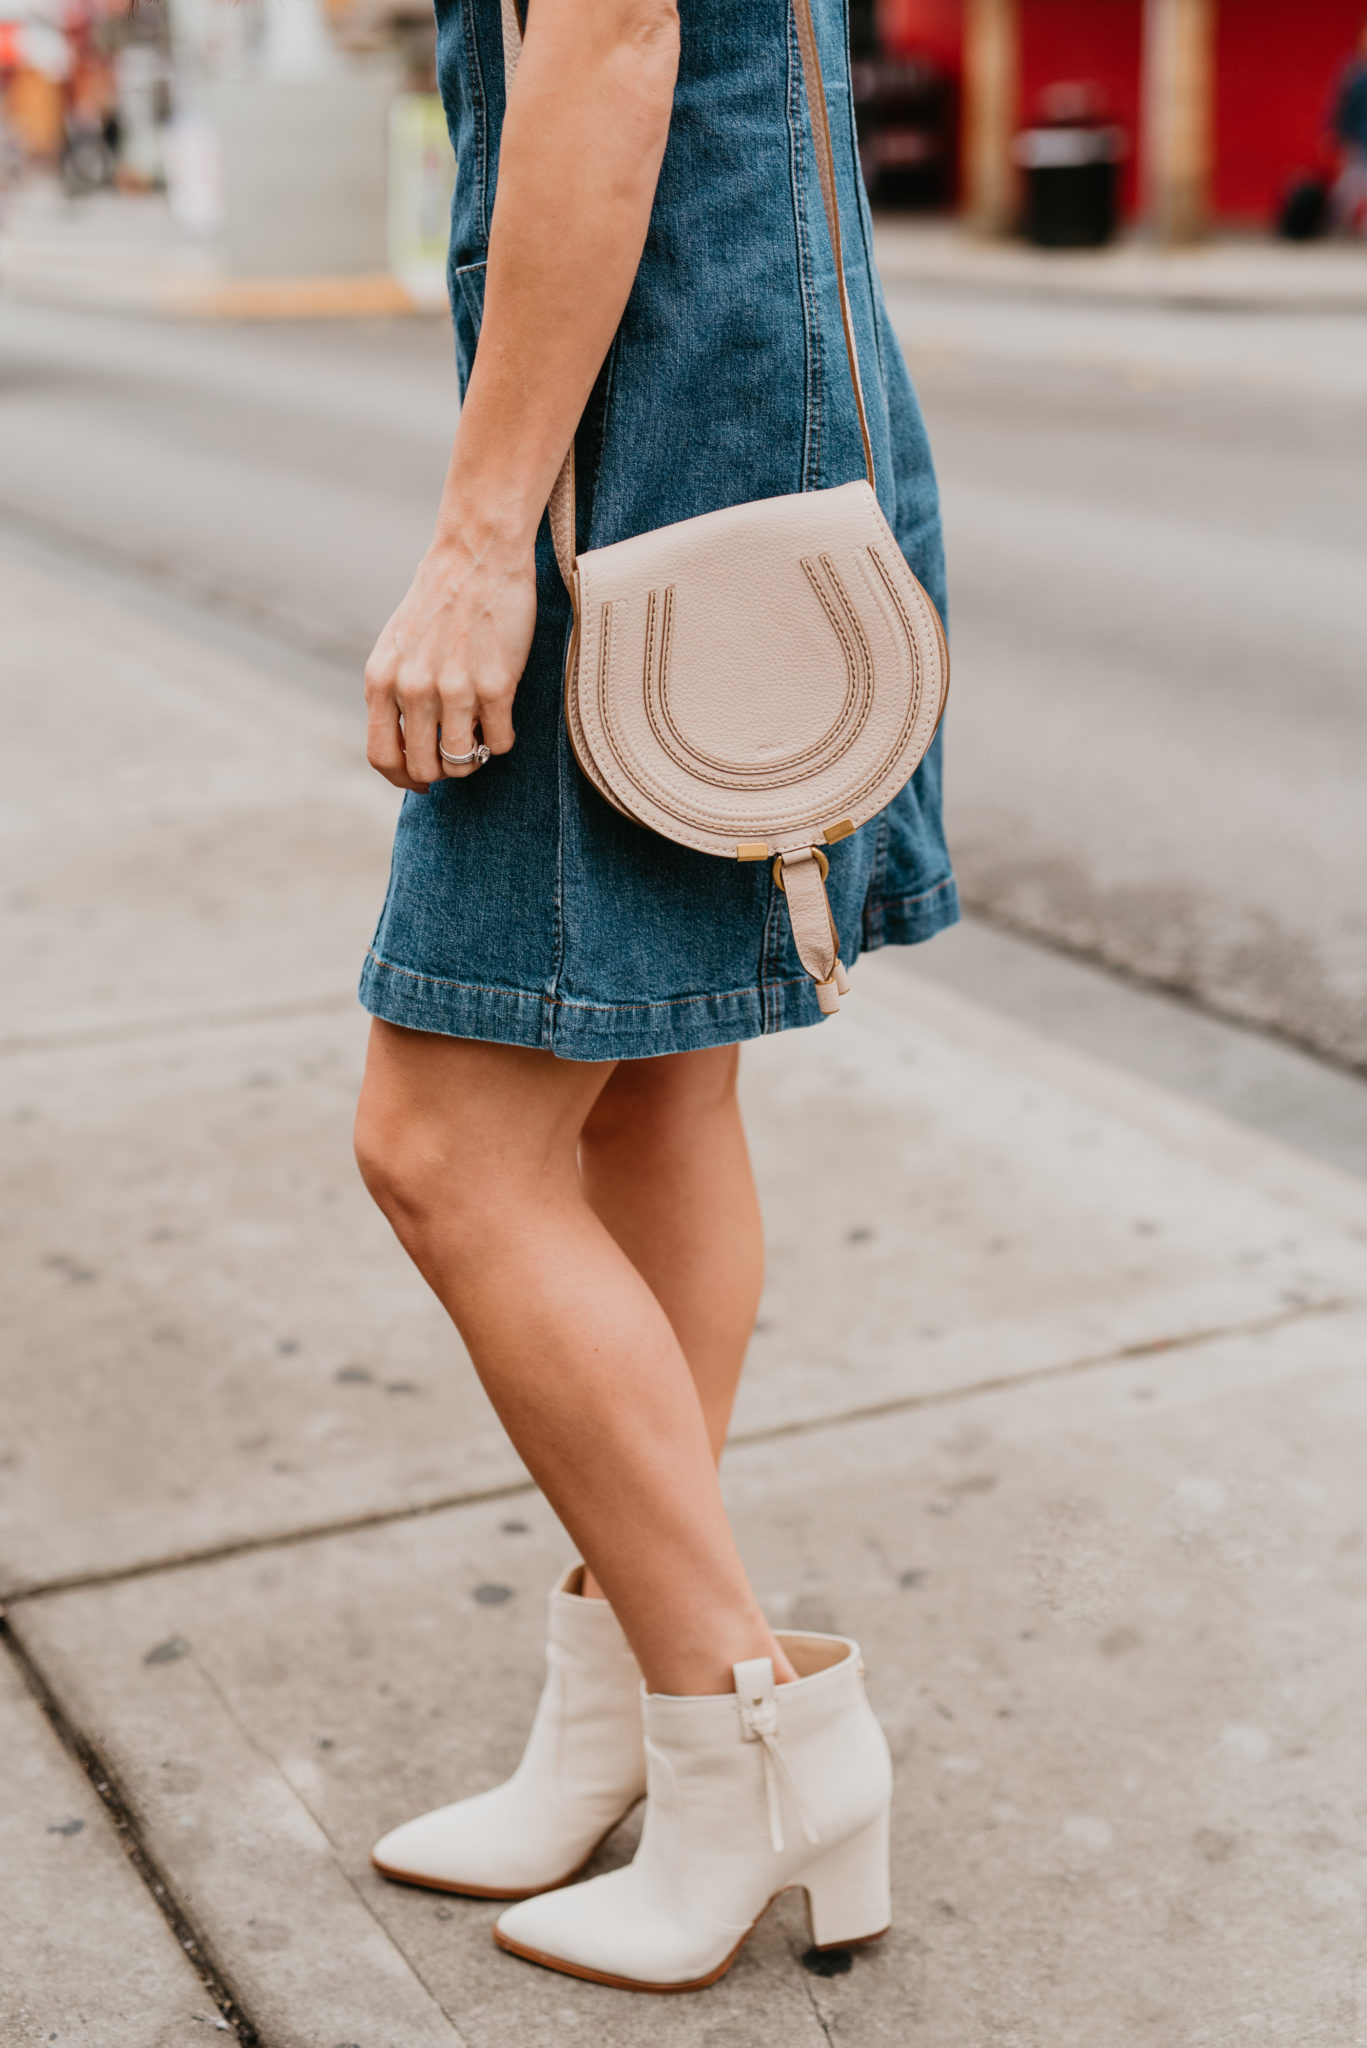 Cute Spring dress look styled by top US fashion blog, Outfits & Outings: image of a woman wearing a Madewell denim dress, Marc Fisher booties and a Chloe crossbody bag